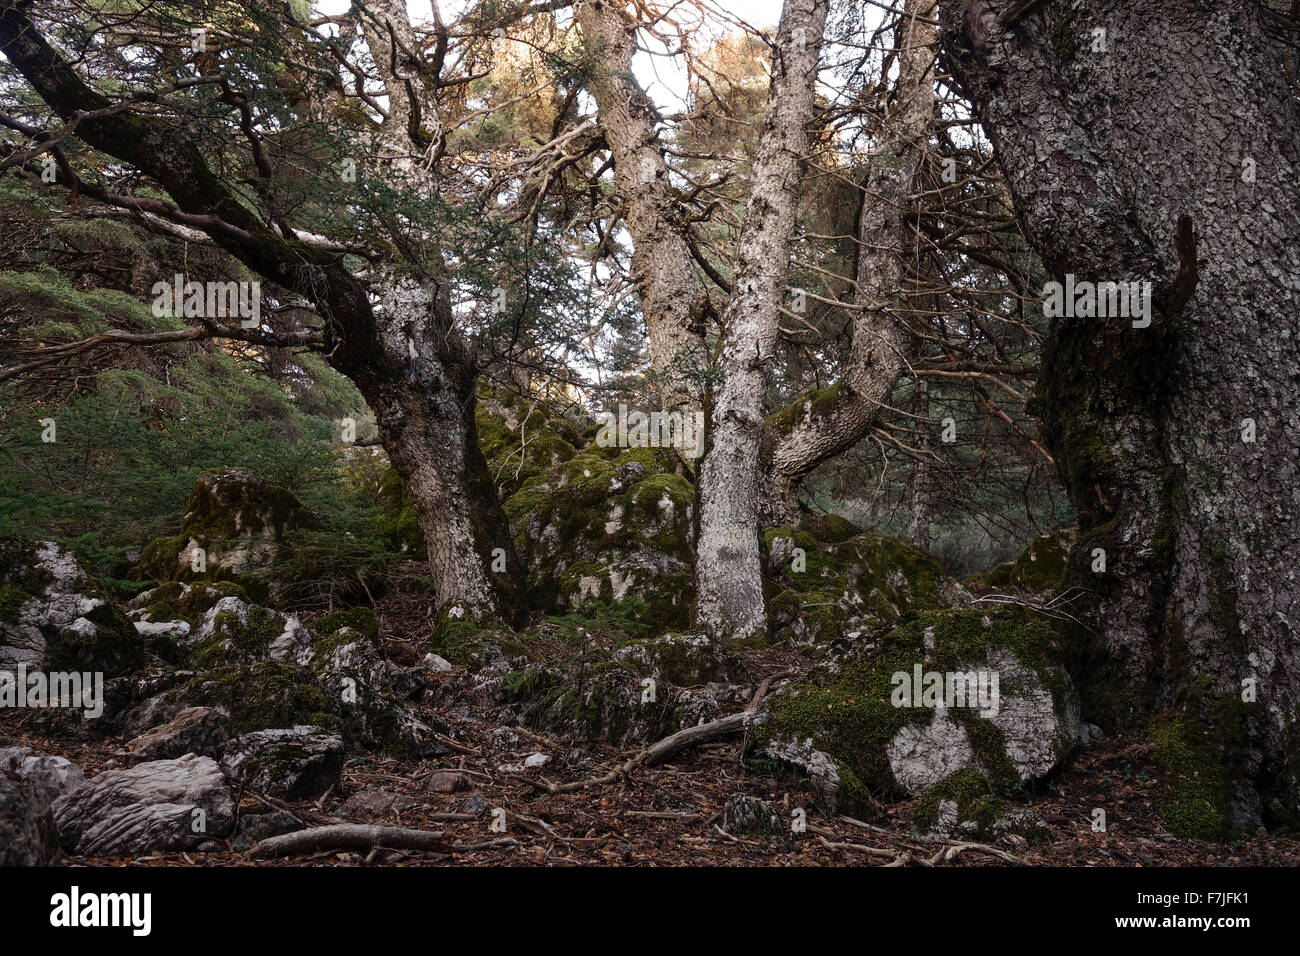 Forest in Natural park, Sierra de las Nieves with spanish fir trees, Malaga, Andalusia, Spain. Stock Photo